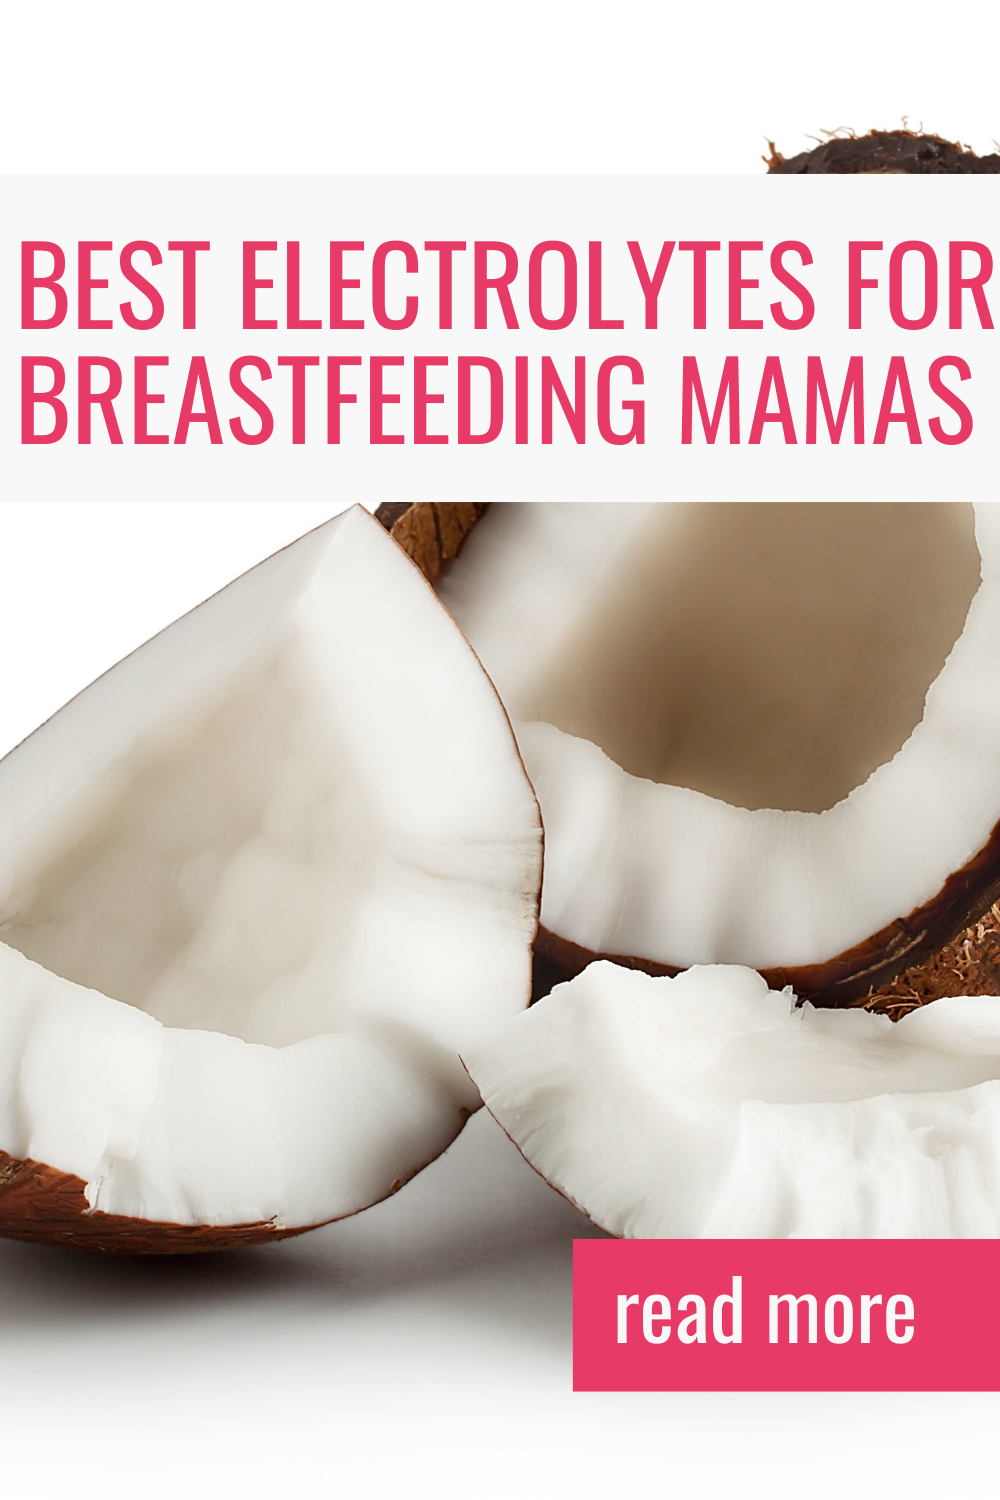 The Best Electrolytes for Breastfeeding Mamas